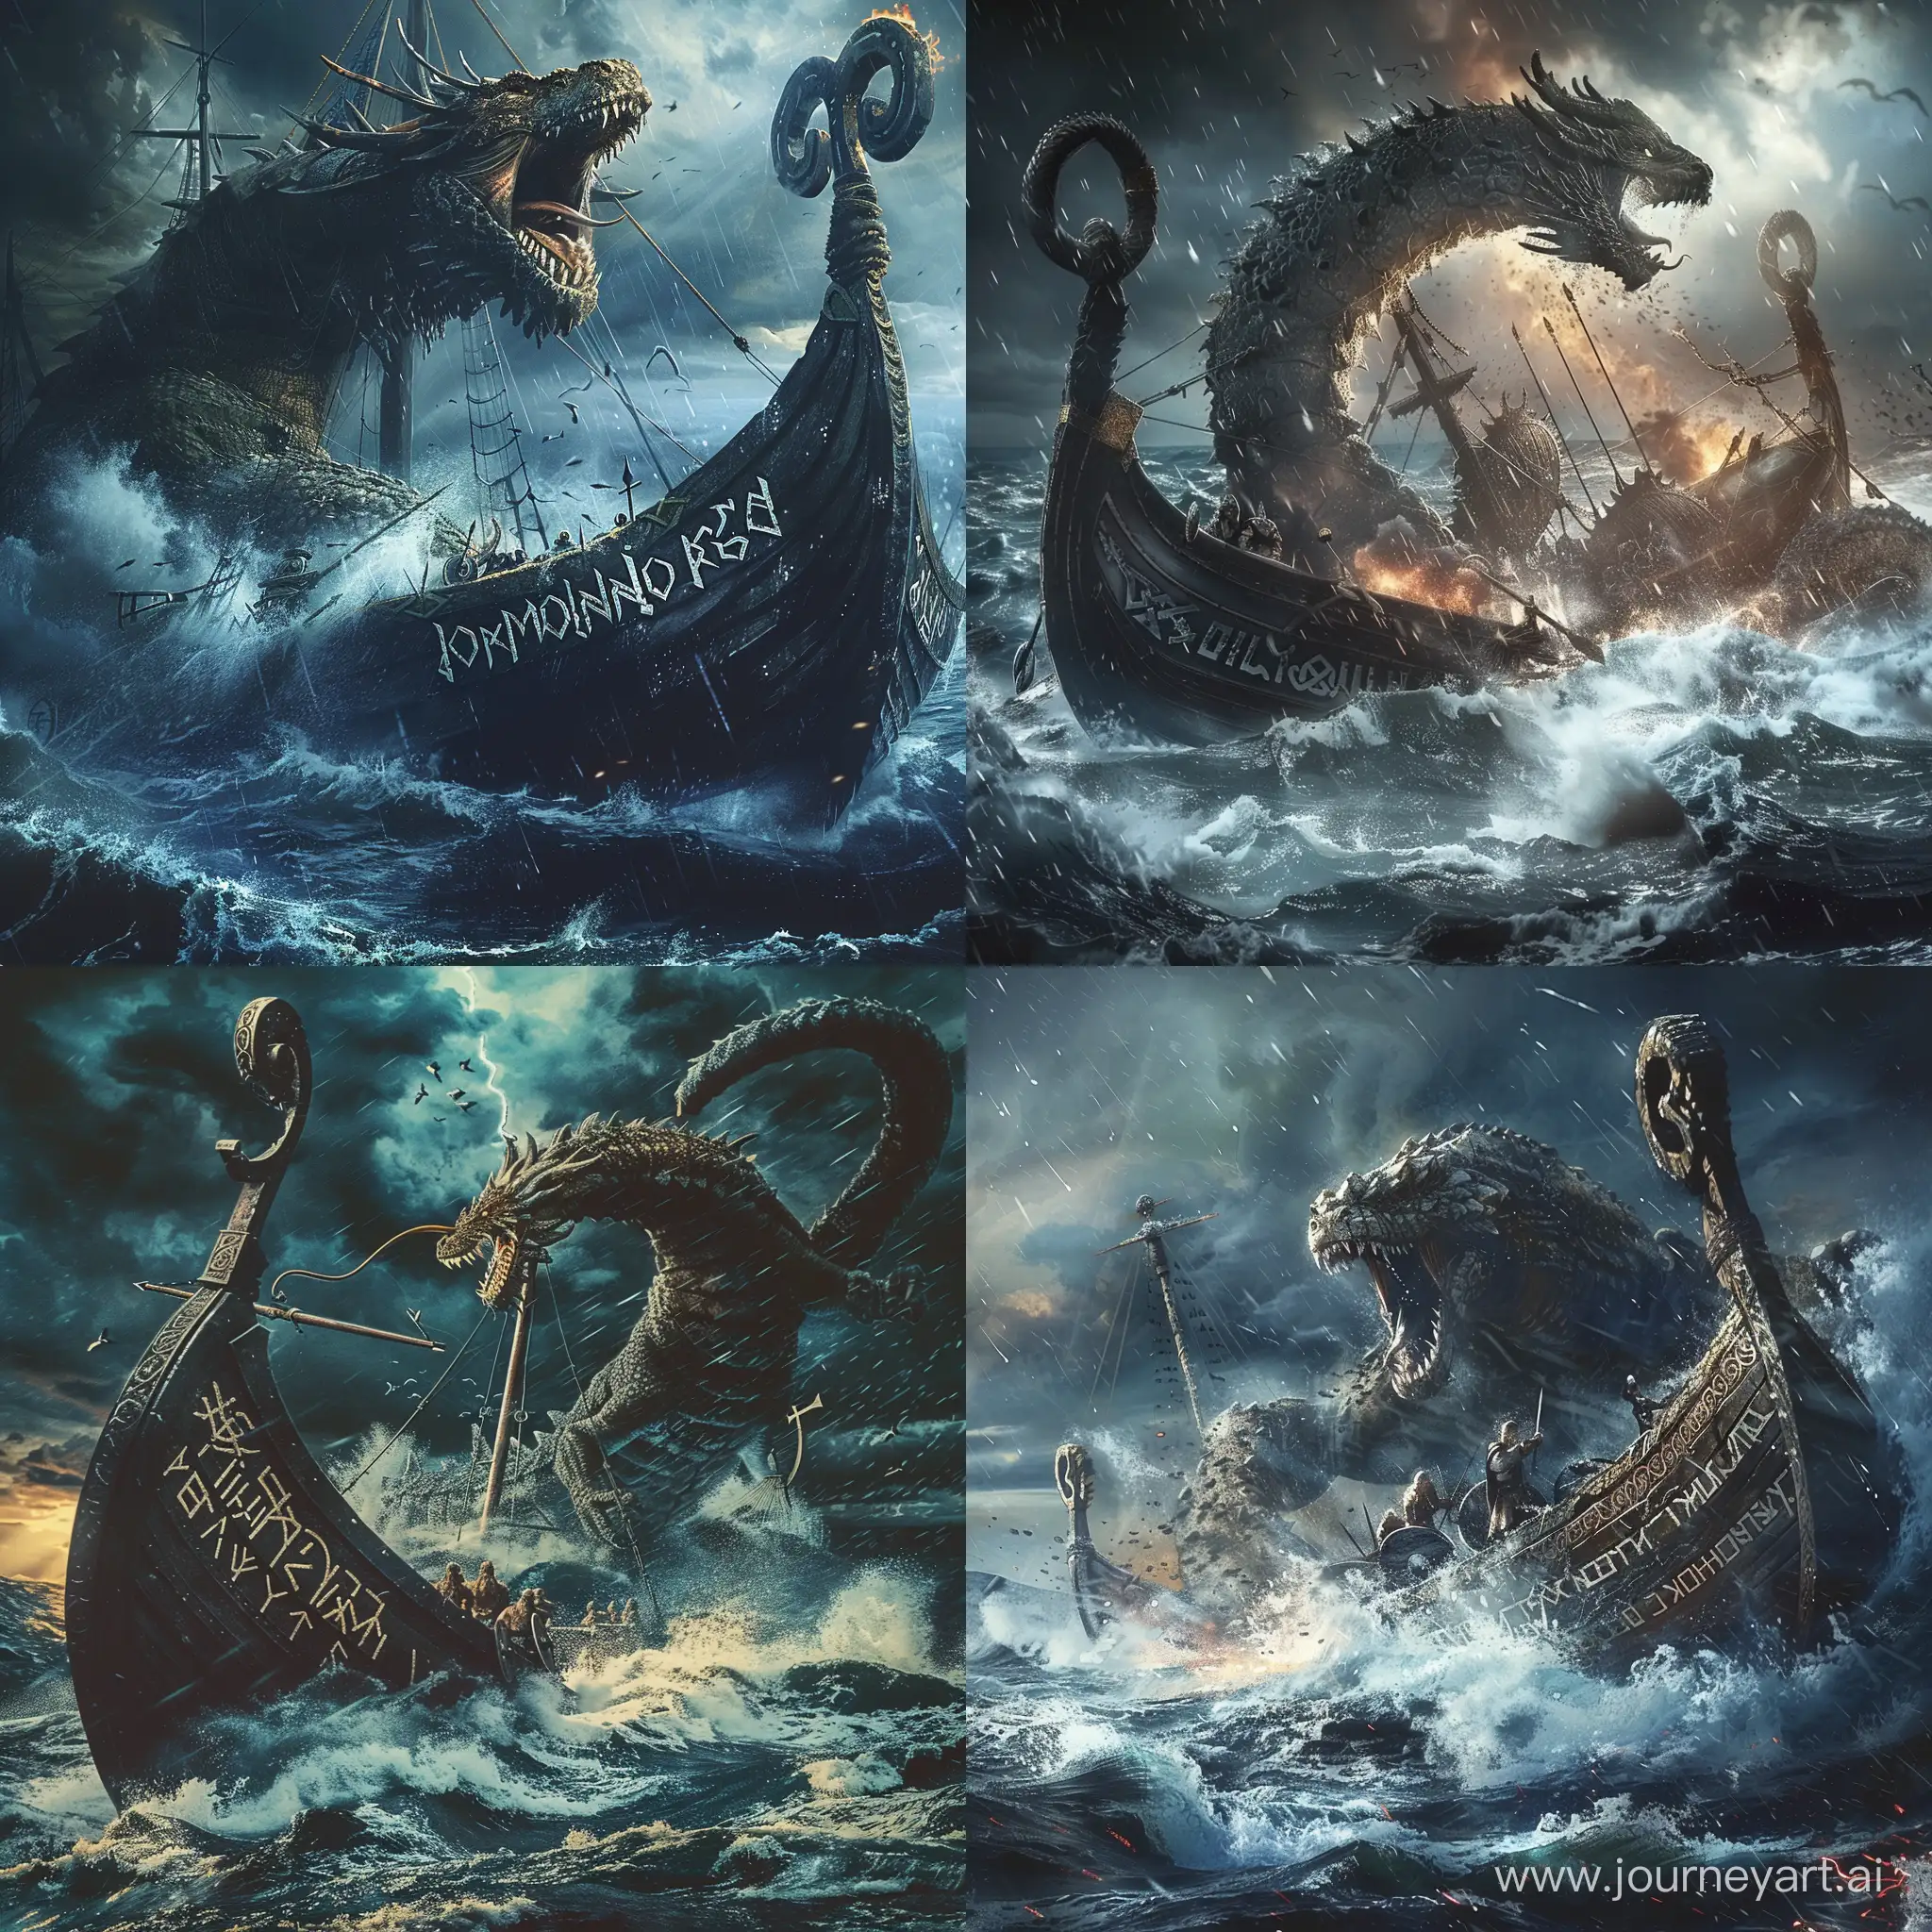 Scandinavian saga creature Jormundandr, massive serpent with scales, attacking a viking longship with dragon figurehead, stormy sea with crashing waves, dramatic lighting, Norse runes inscribed on ship's hull, epic battle scene, mythological, painterly style --s 150 --ar 1:1 --c 10